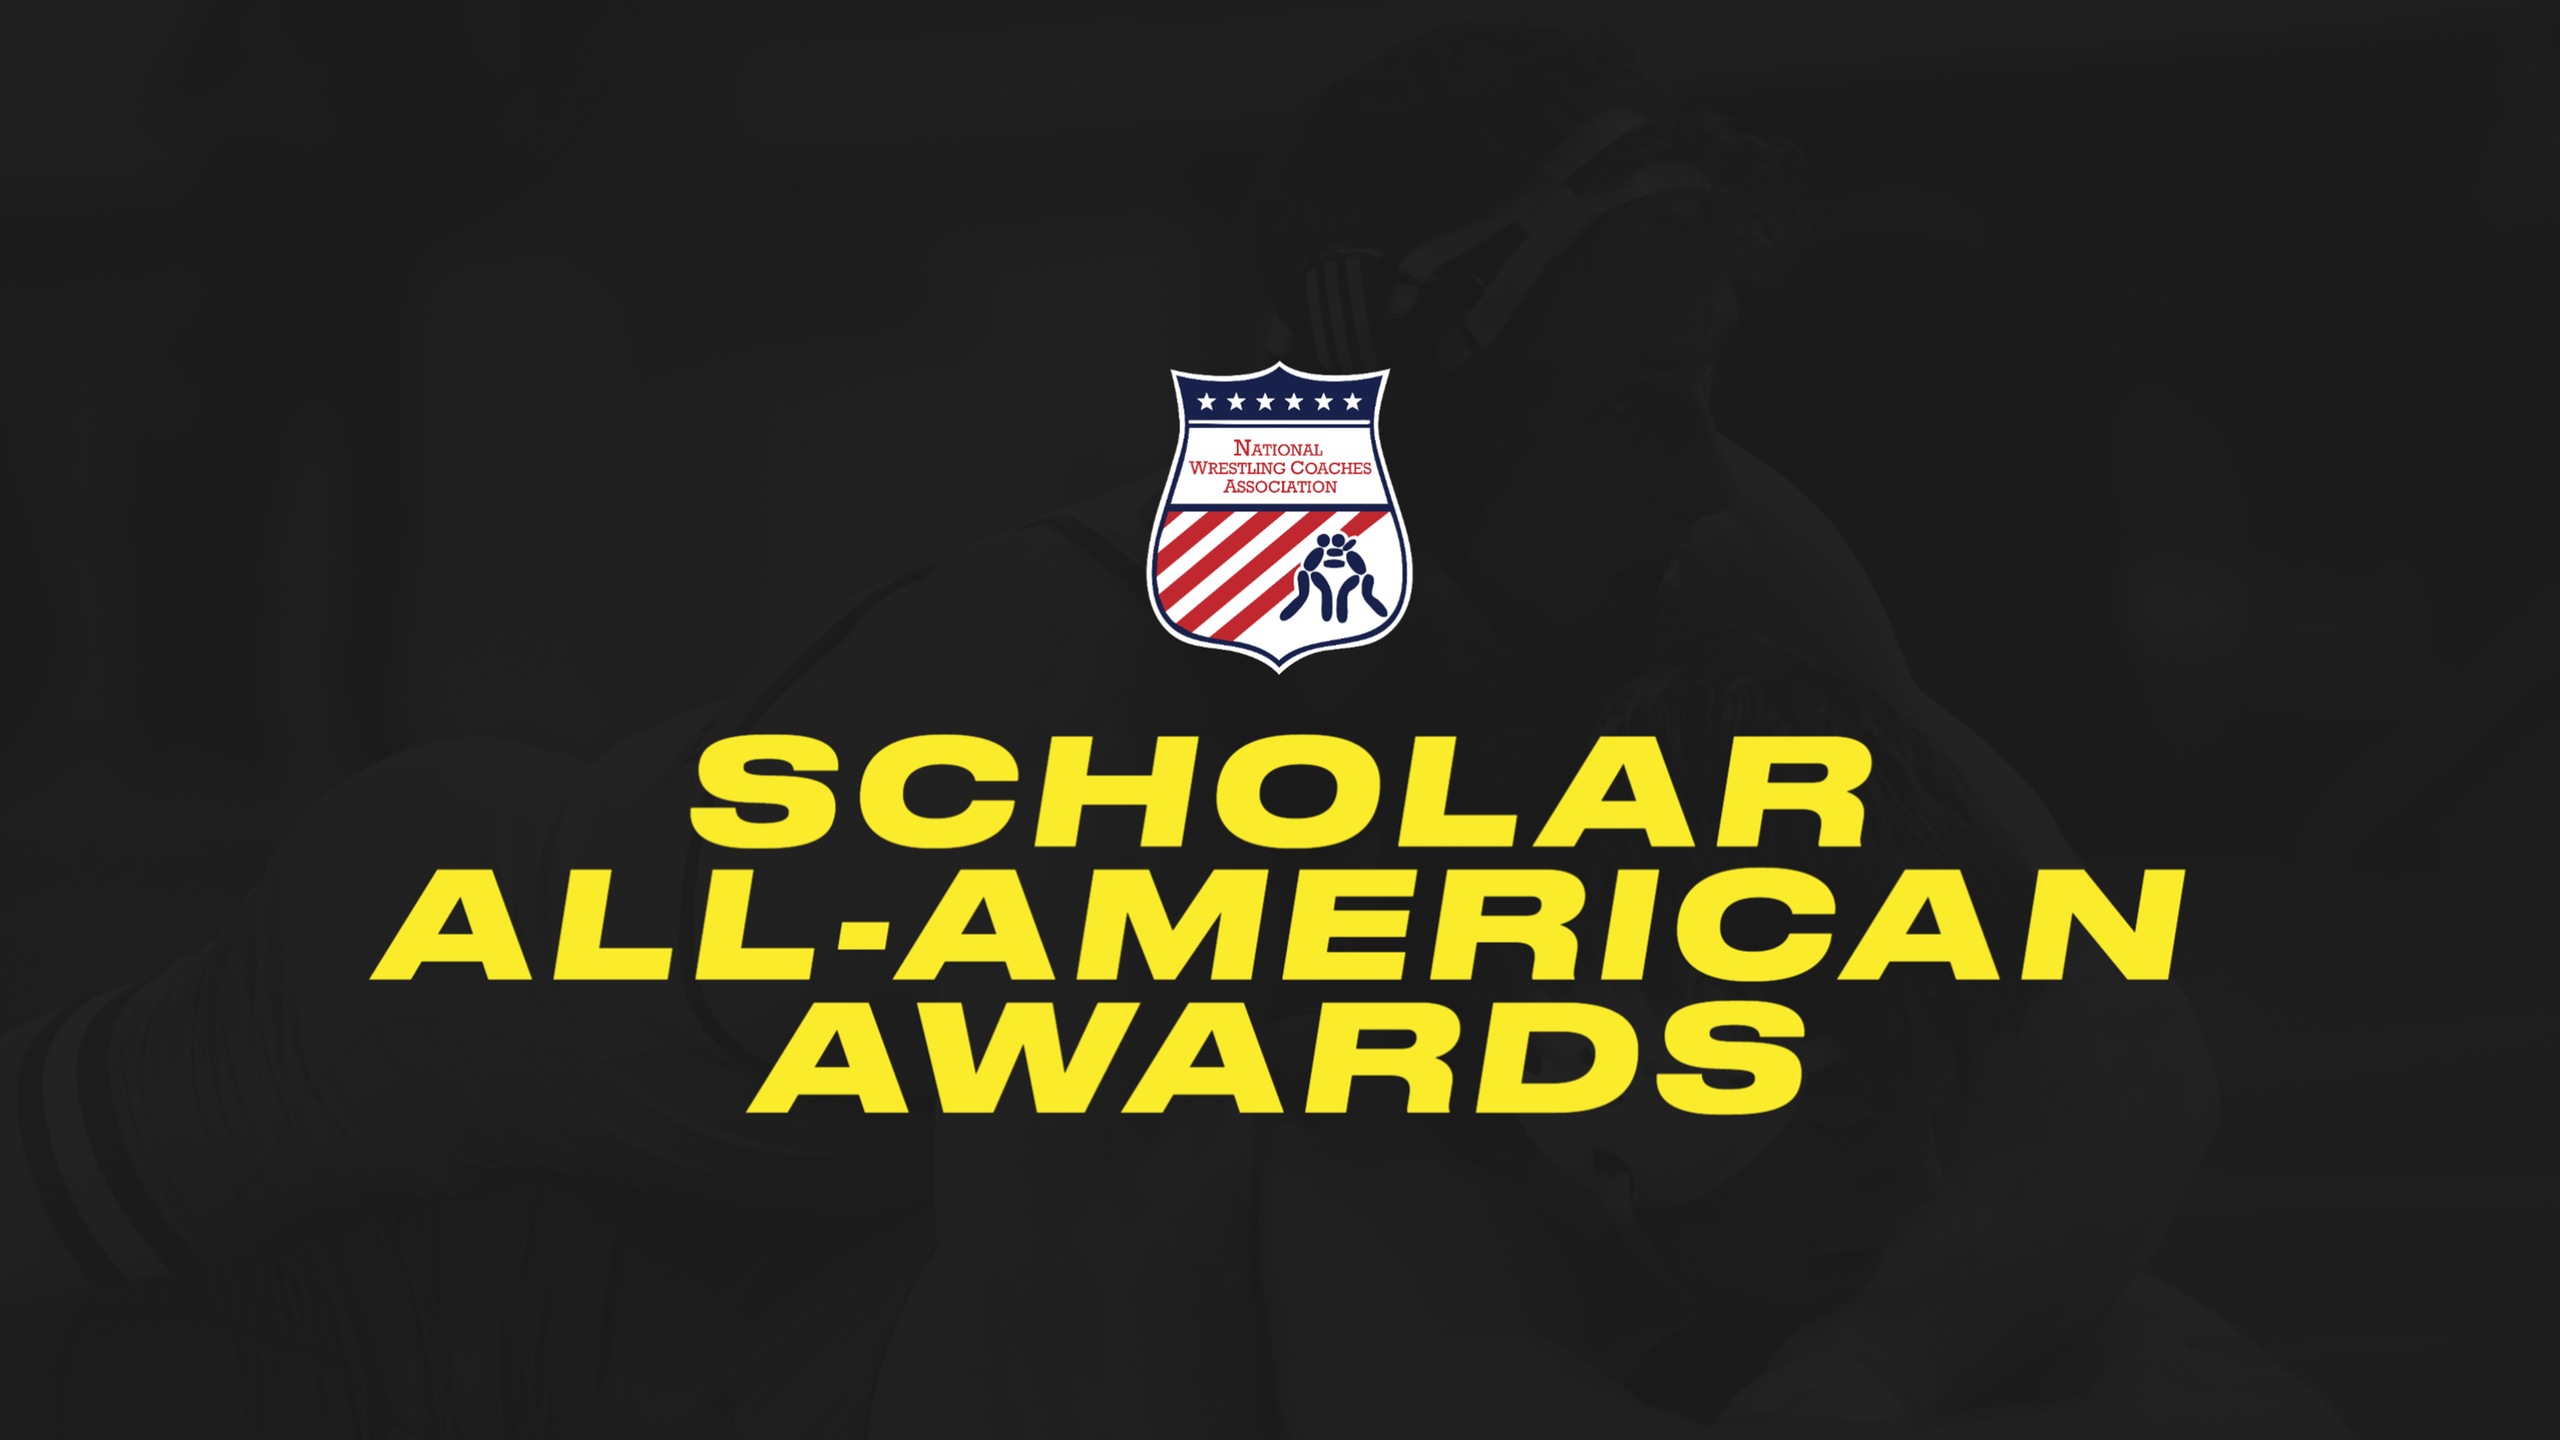 Heidelberg, Ohio Northern and 27 OAC Wrestlers Recognized in NWCA's Scholar All-American Awards